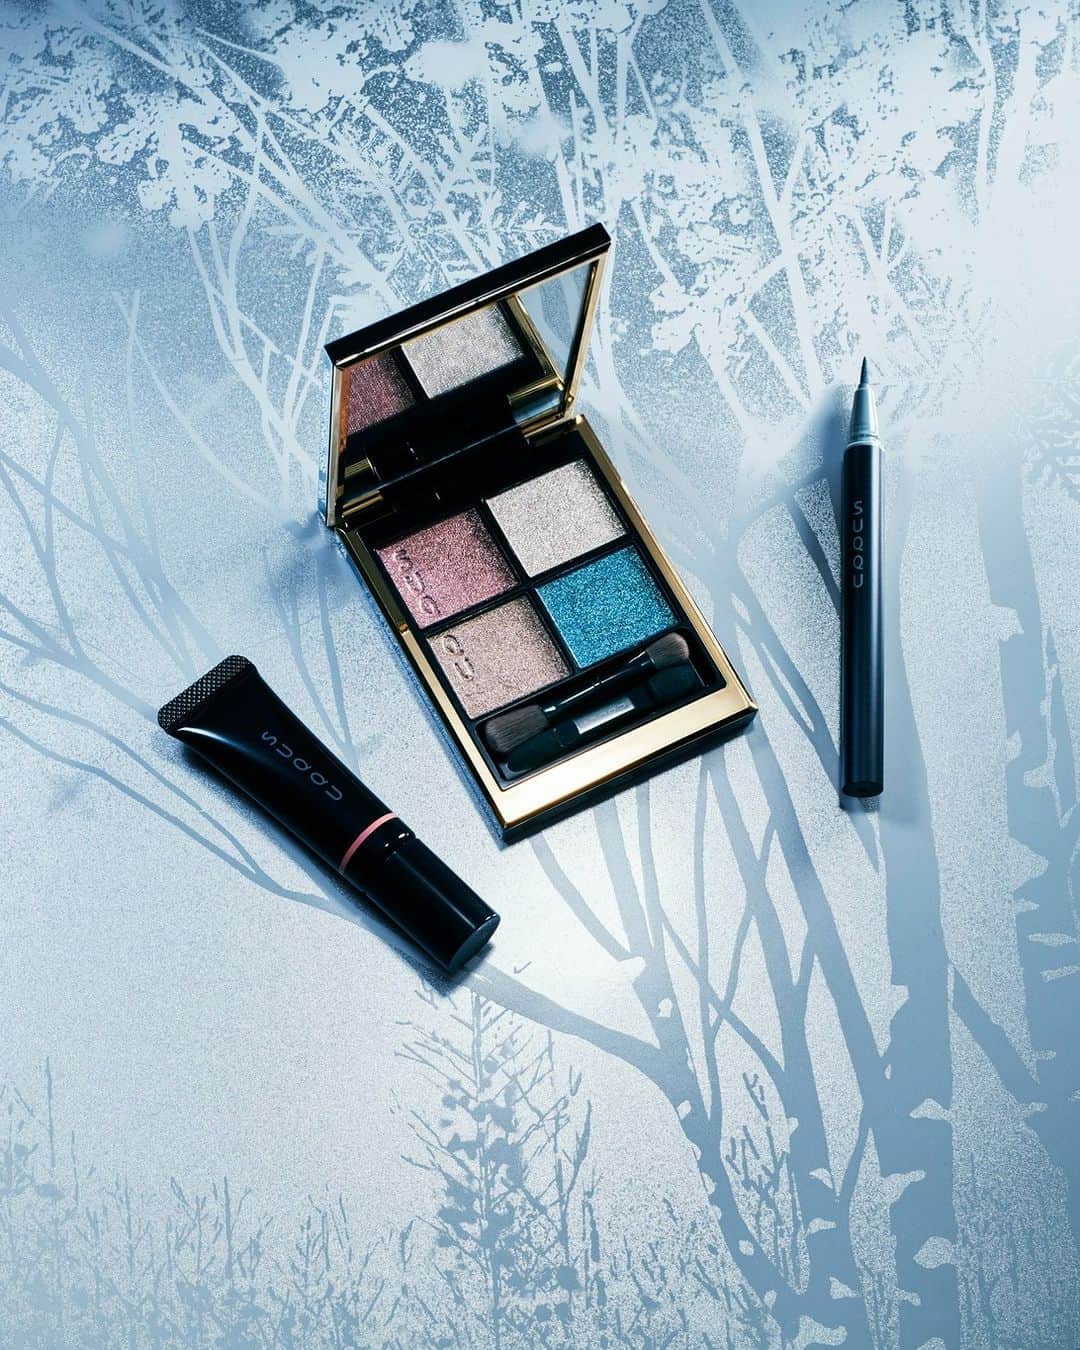 SUQQU公式Instgramアカウントさんのインスタグラム写真 - (SUQQU公式InstgramアカウントInstagram)「The makeup kit contains SIGNATURE COLOR EYES 131 RIKKA, inspired by shimmering silver flowers fluttering with serenity. Sharp gray and light silver give a noble and cool impression, while pink adds warmth and blue, a vivid brightness. MAKEUP KIT RIKKA ・SIGNATURE COLOR EYES 131 RIKKA ・NUANCE EYELINER 110 Ice Gray ・DEWY LIQUID BLUSH 101 HANAIROHONOKA *Limited quantity  静寂とともに舞う、煌めく銀花をイメージしたアイシャドウパレットのキット。 シャープなグレーと軽やかなシルバーで凛とした冷たさを感じさせながら、ピンクで温かみを、ブルーで鮮やかな明るさを。 メイクアップ キット 六花 ・シグニチャー カラー アイズ 131 六花 -RIKKA ・ニュアンス アイライナー 110 アイスグレー ・デューイー リクイド ブラッシュ 101 花彩洸 -HANAIROHONOKA ※数量限定  #SUQQU #スック #jbeauty #cosmetics #SUQQU20th #SUQQUcolormakeup #holiday #holidaycollection #銀世界 #newcollection #newproducts #limited #六花」10月14日 17時00分 - suqqu_official